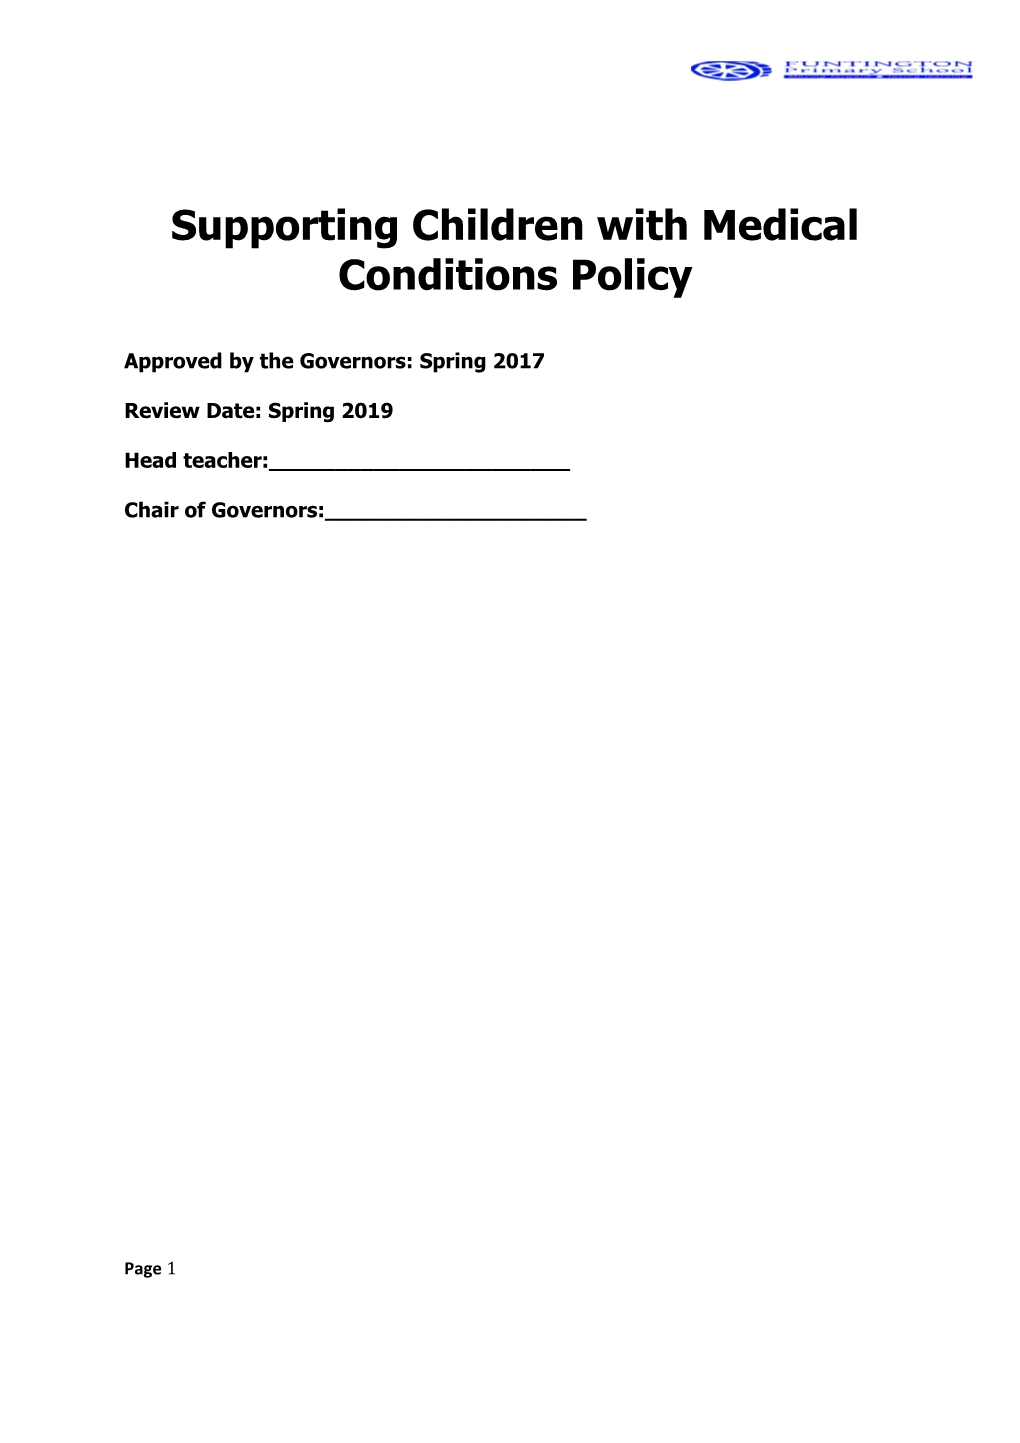 Supporting Children with Medical Conditions Policy